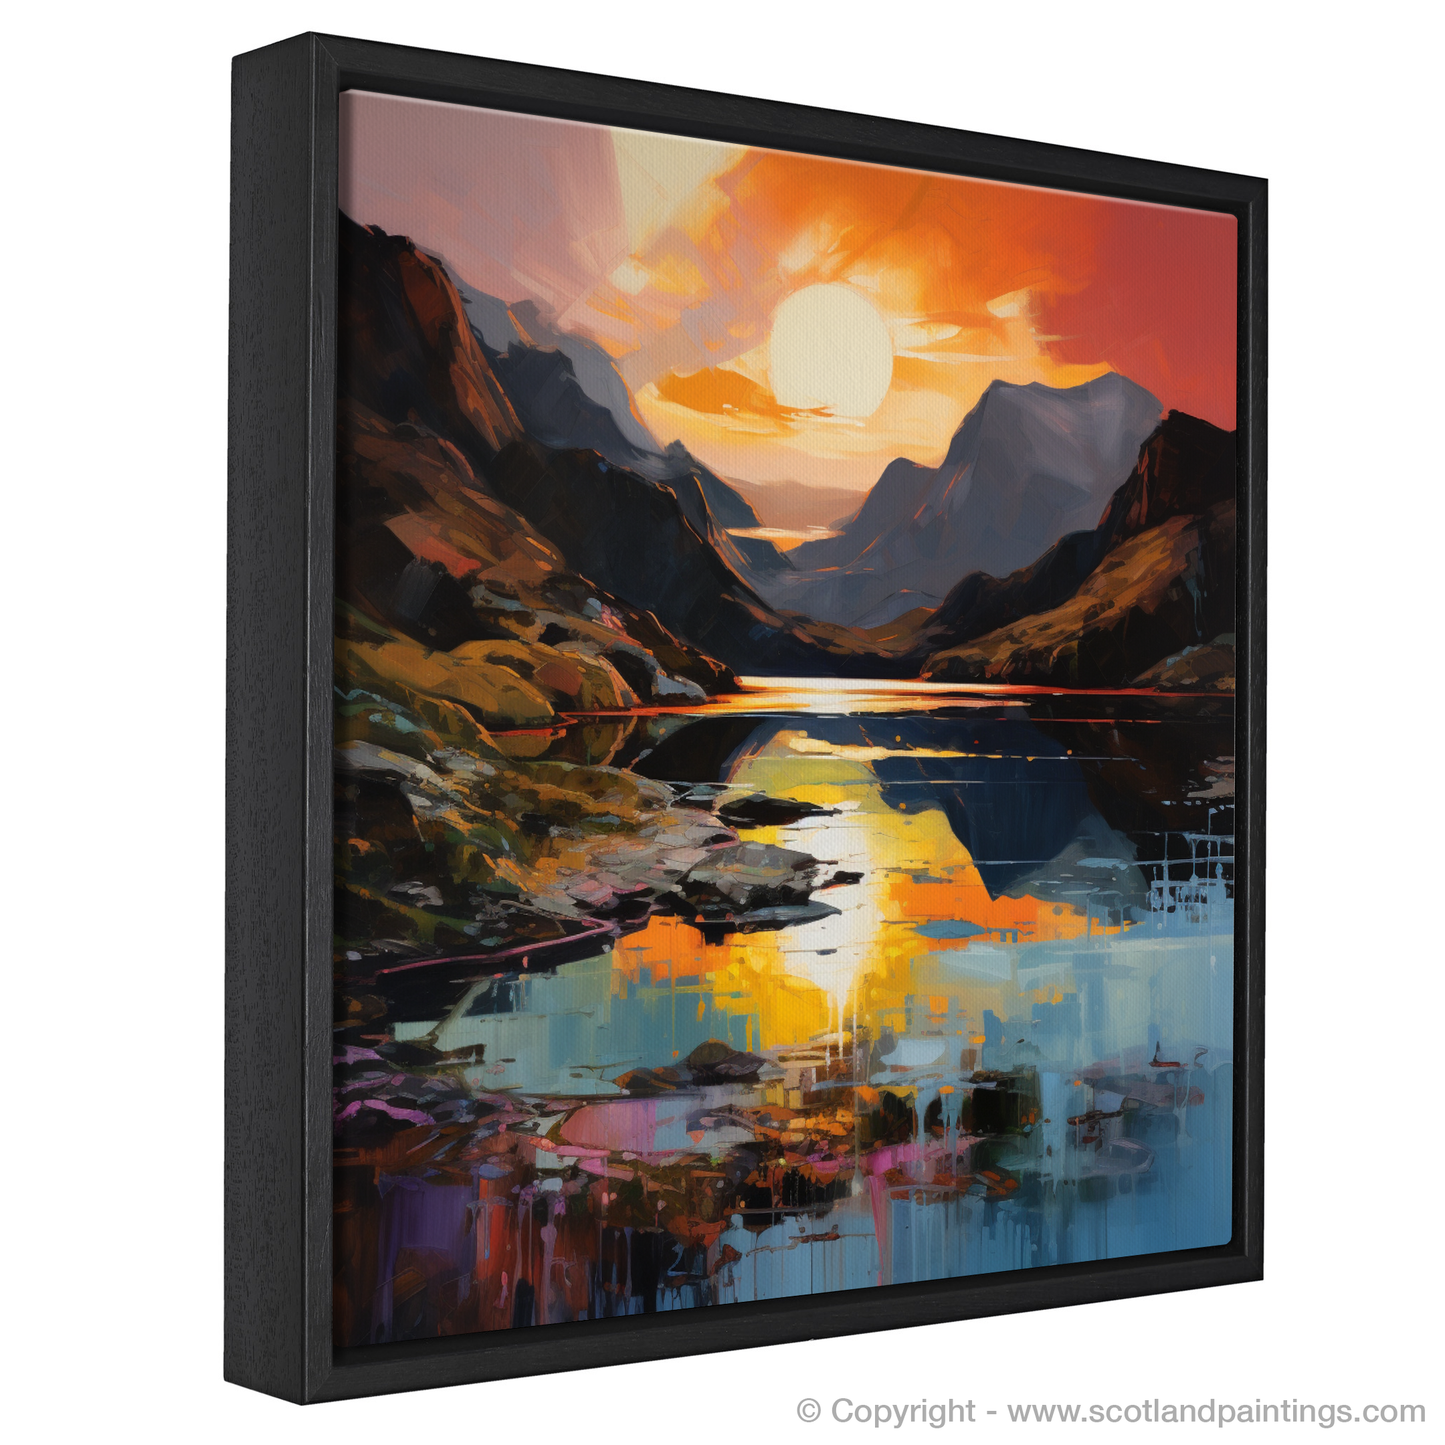 Painting and Art Print of Loch Coruisk at sunset entitled "Sunset Embrace at Loch Coruisk: An Expressionist Tribute".